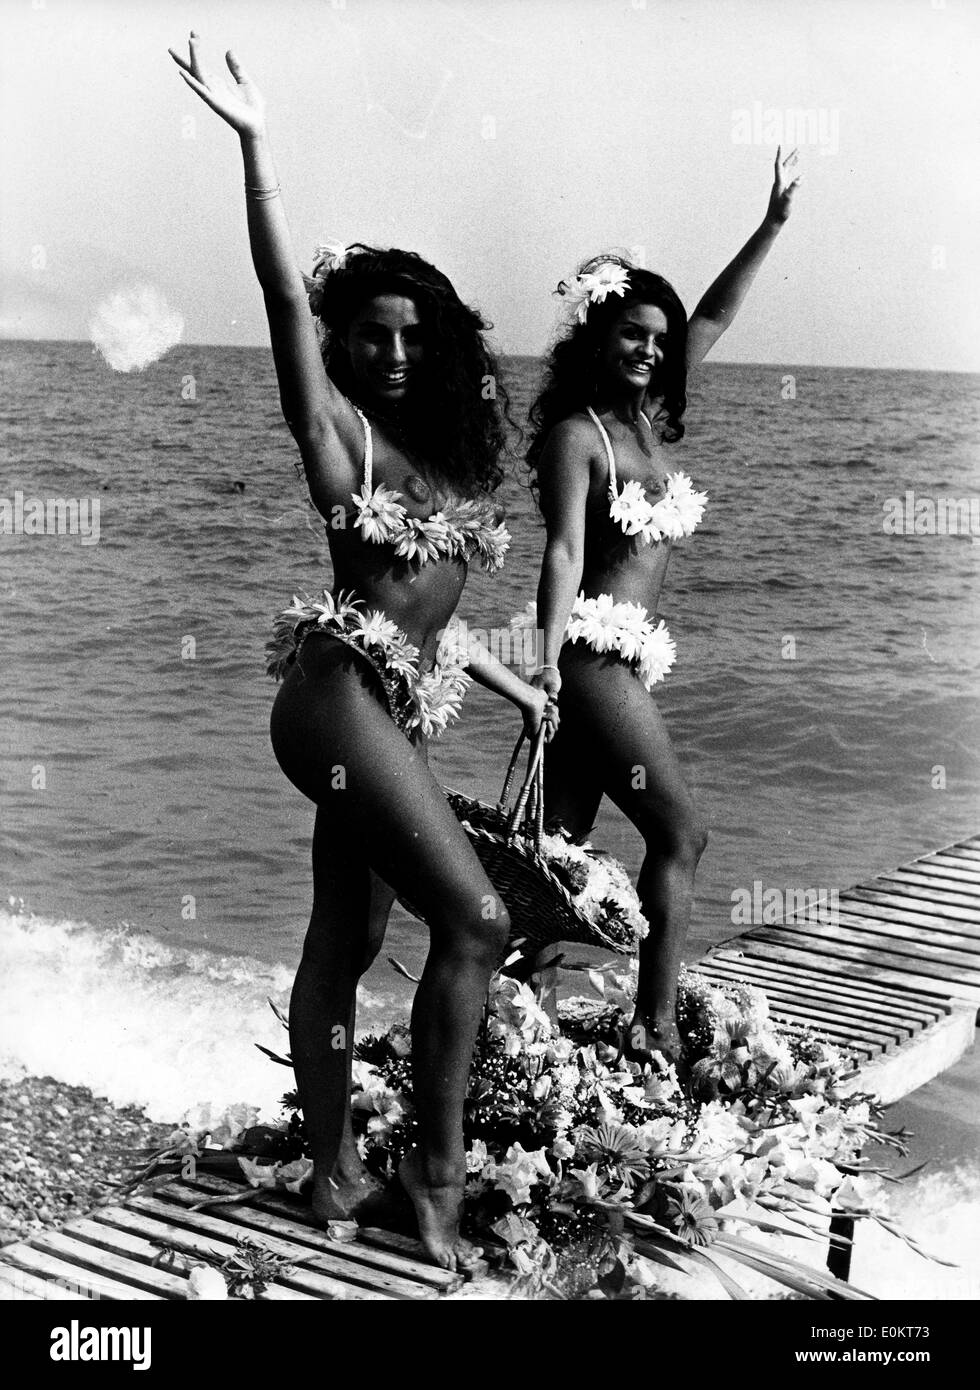 Jan. 01, 1950 - London, England, United Kingdom - File Photo: circa 1940s-1950s. Girls posing in bikini's in fashion shows, shoots and on beaches tanning. According to the official version, the modern bikini was invented by French engineer Louis Rekard and fashion designer Jacques Heim in Paris in 1946 and introduced on July 5 at a fashion show at Piscine Molitor in Paris. It was a string bikini with a g-string back Stock Photo